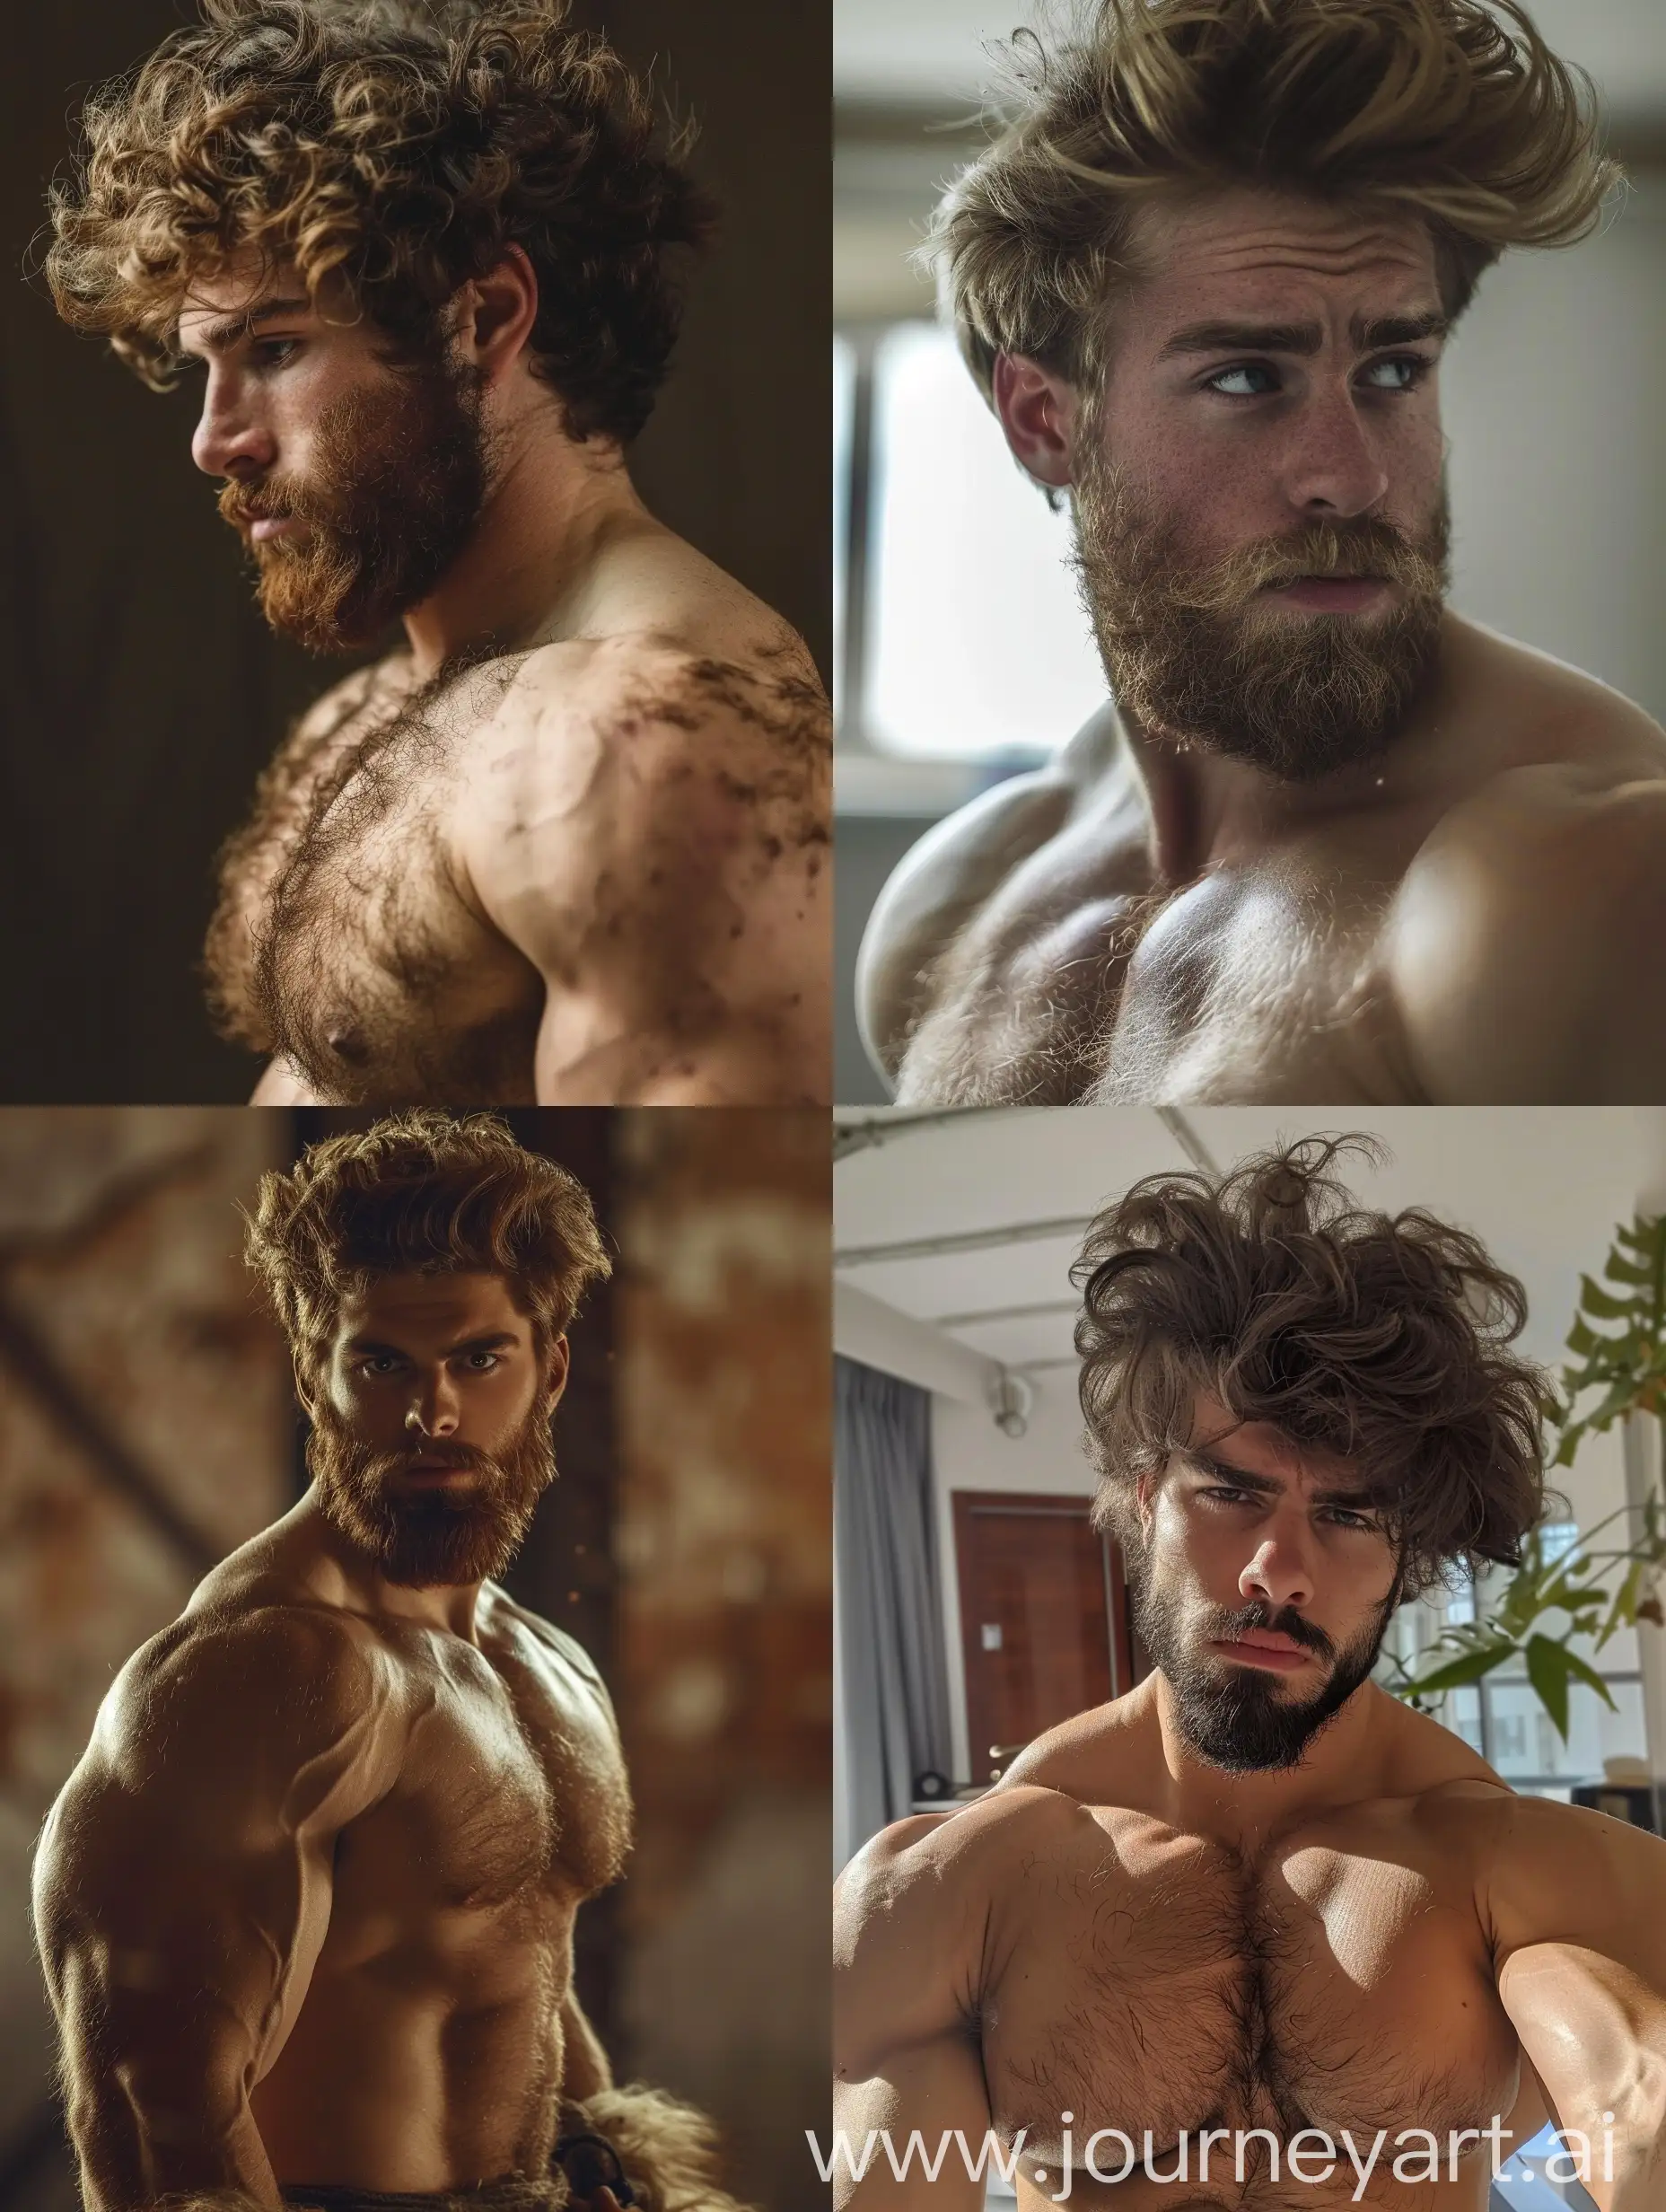 Young-Man-Transformed-into-Muscular-Uncle-Identity-Shift-Image